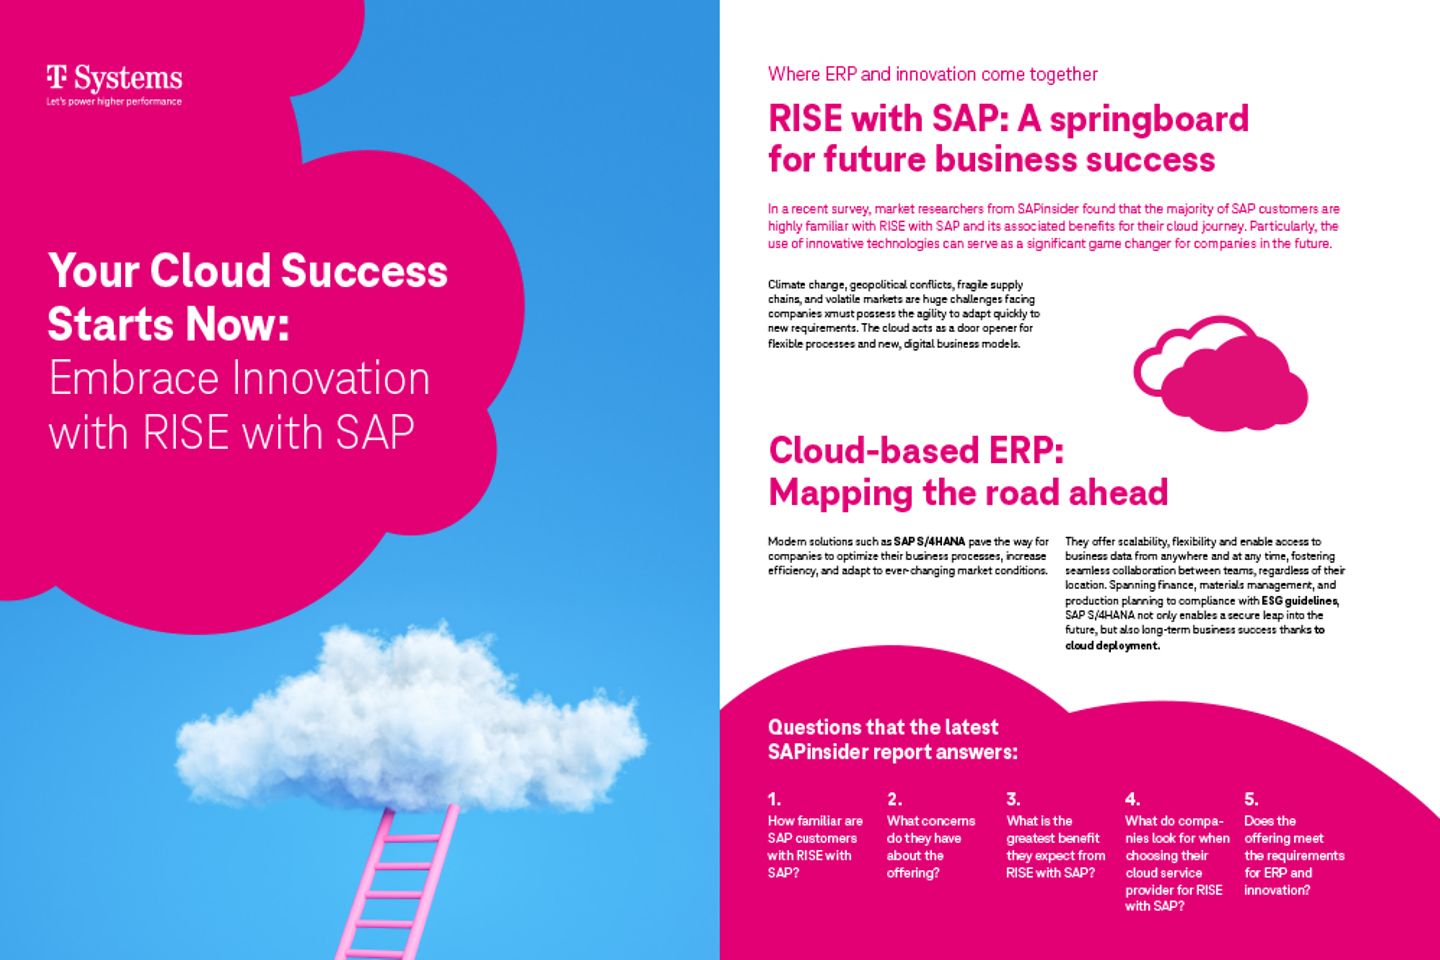 Cover and the next page as a screenshot showing the E-paper: RISE with SAP